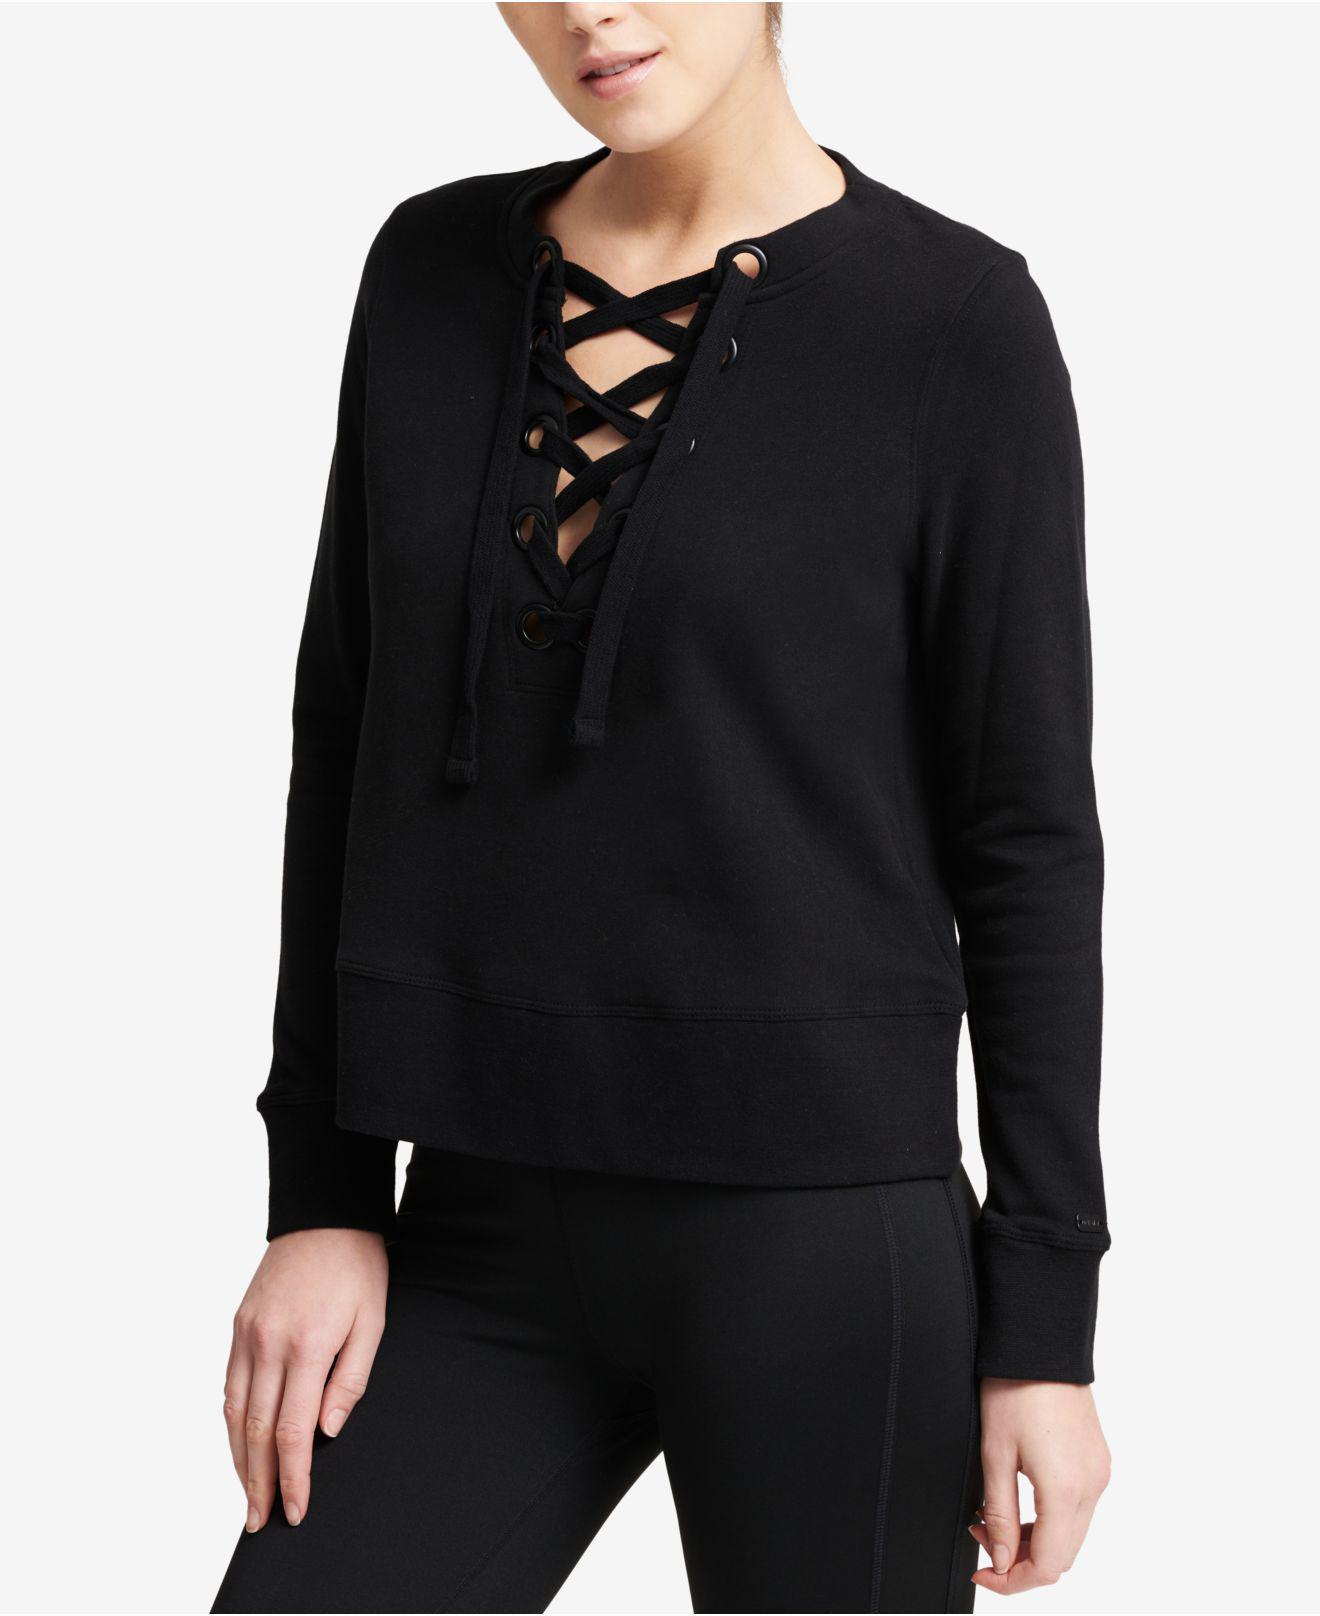 DKNY Sport Cotton Lace-up French Terry Sweatshirt in Black - Lyst